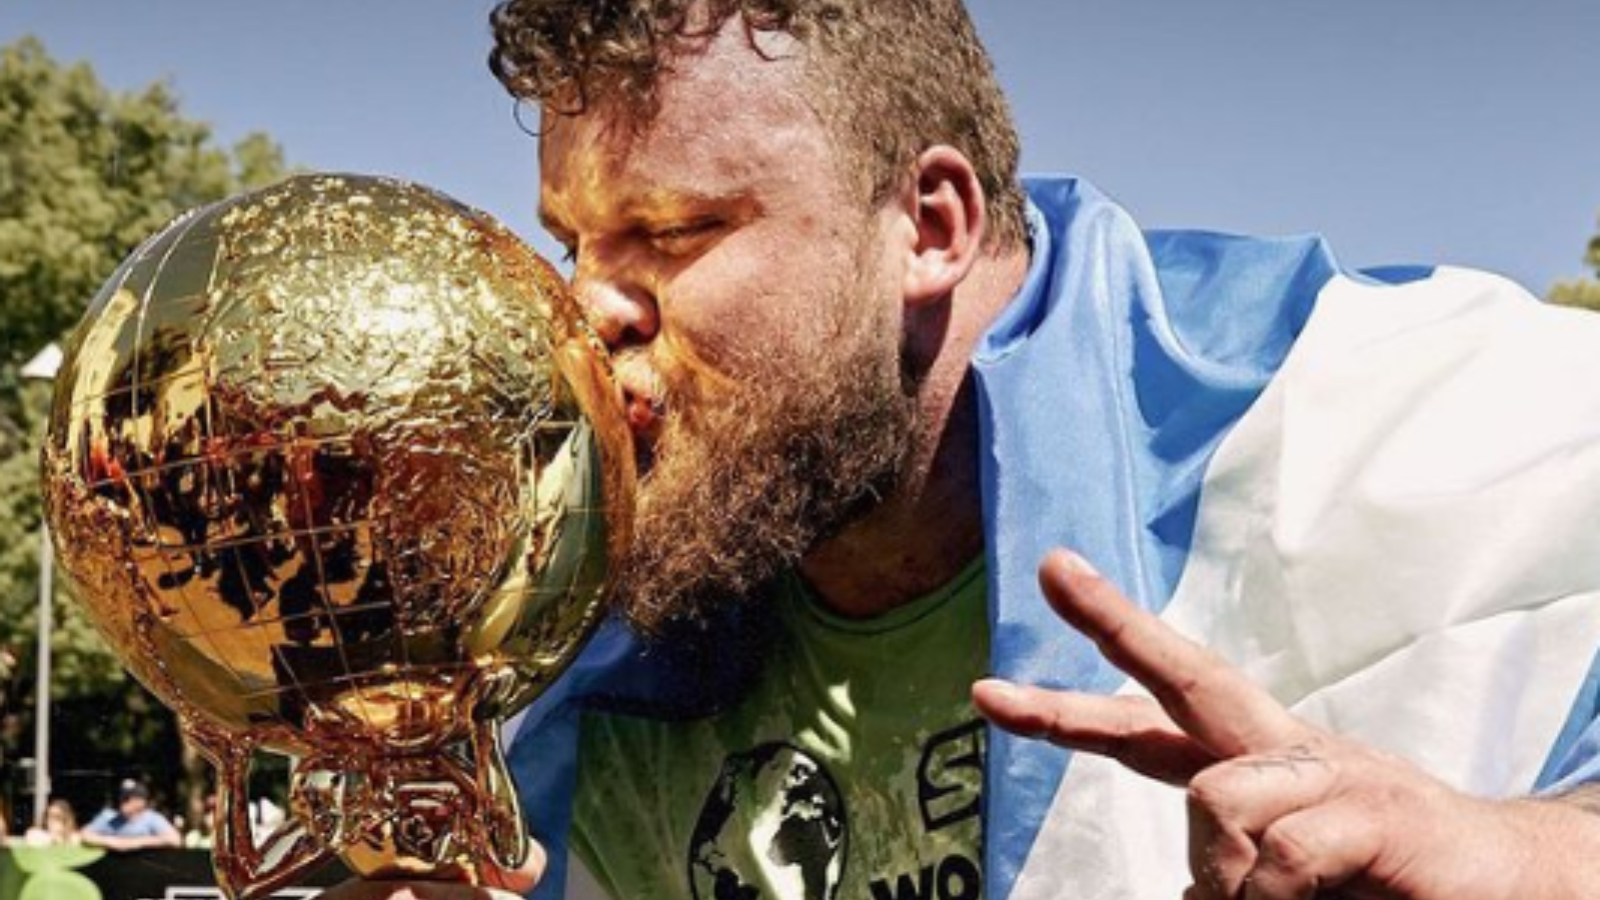 How to Watch the 2023 World's Strongest Man Competition Online